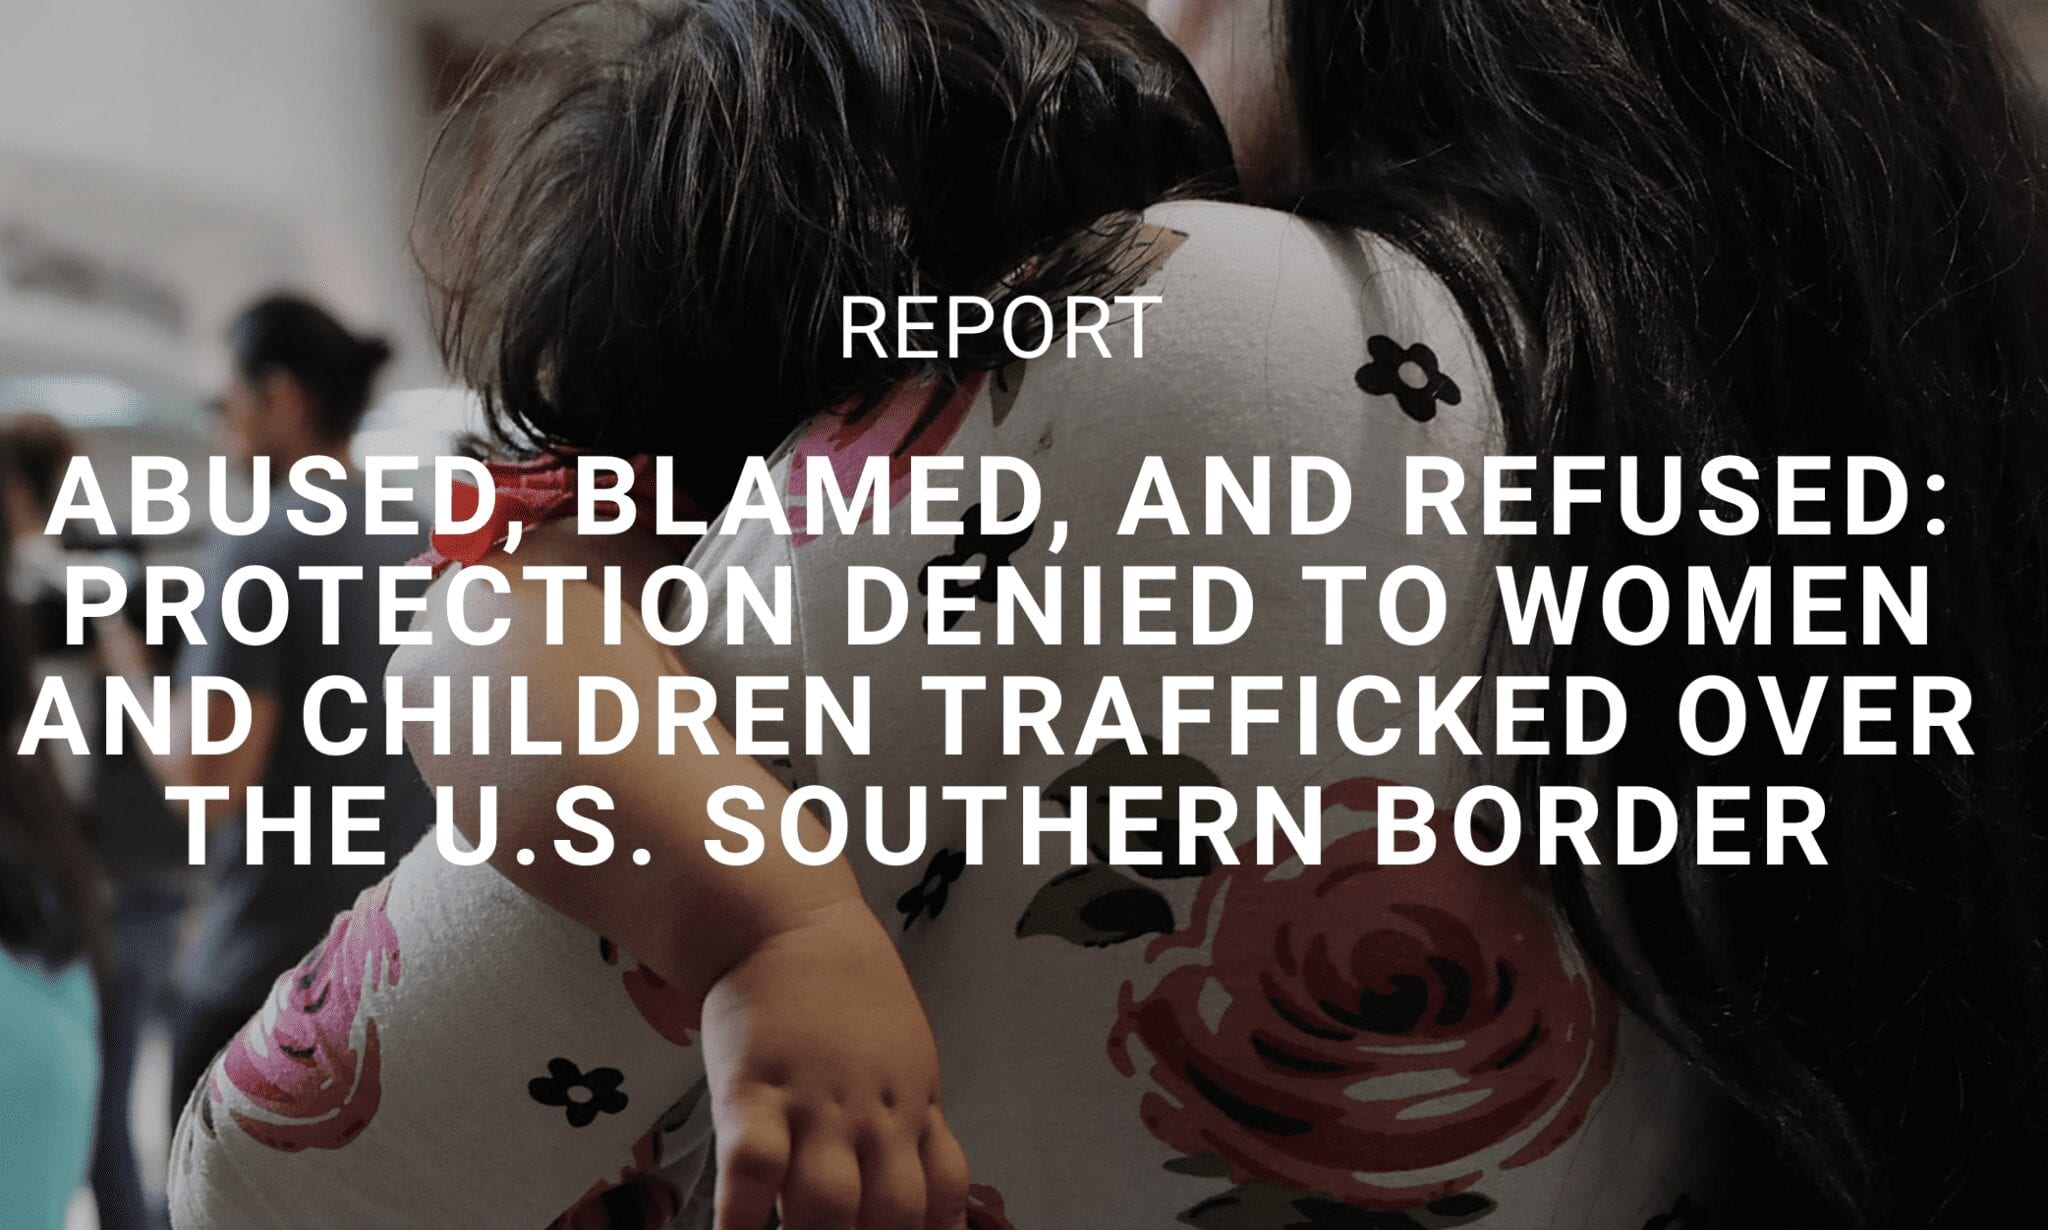 Abused, Blamed, and Refused: Protection Denied to Women and Children Trafficked Over the U.S. Southern Border